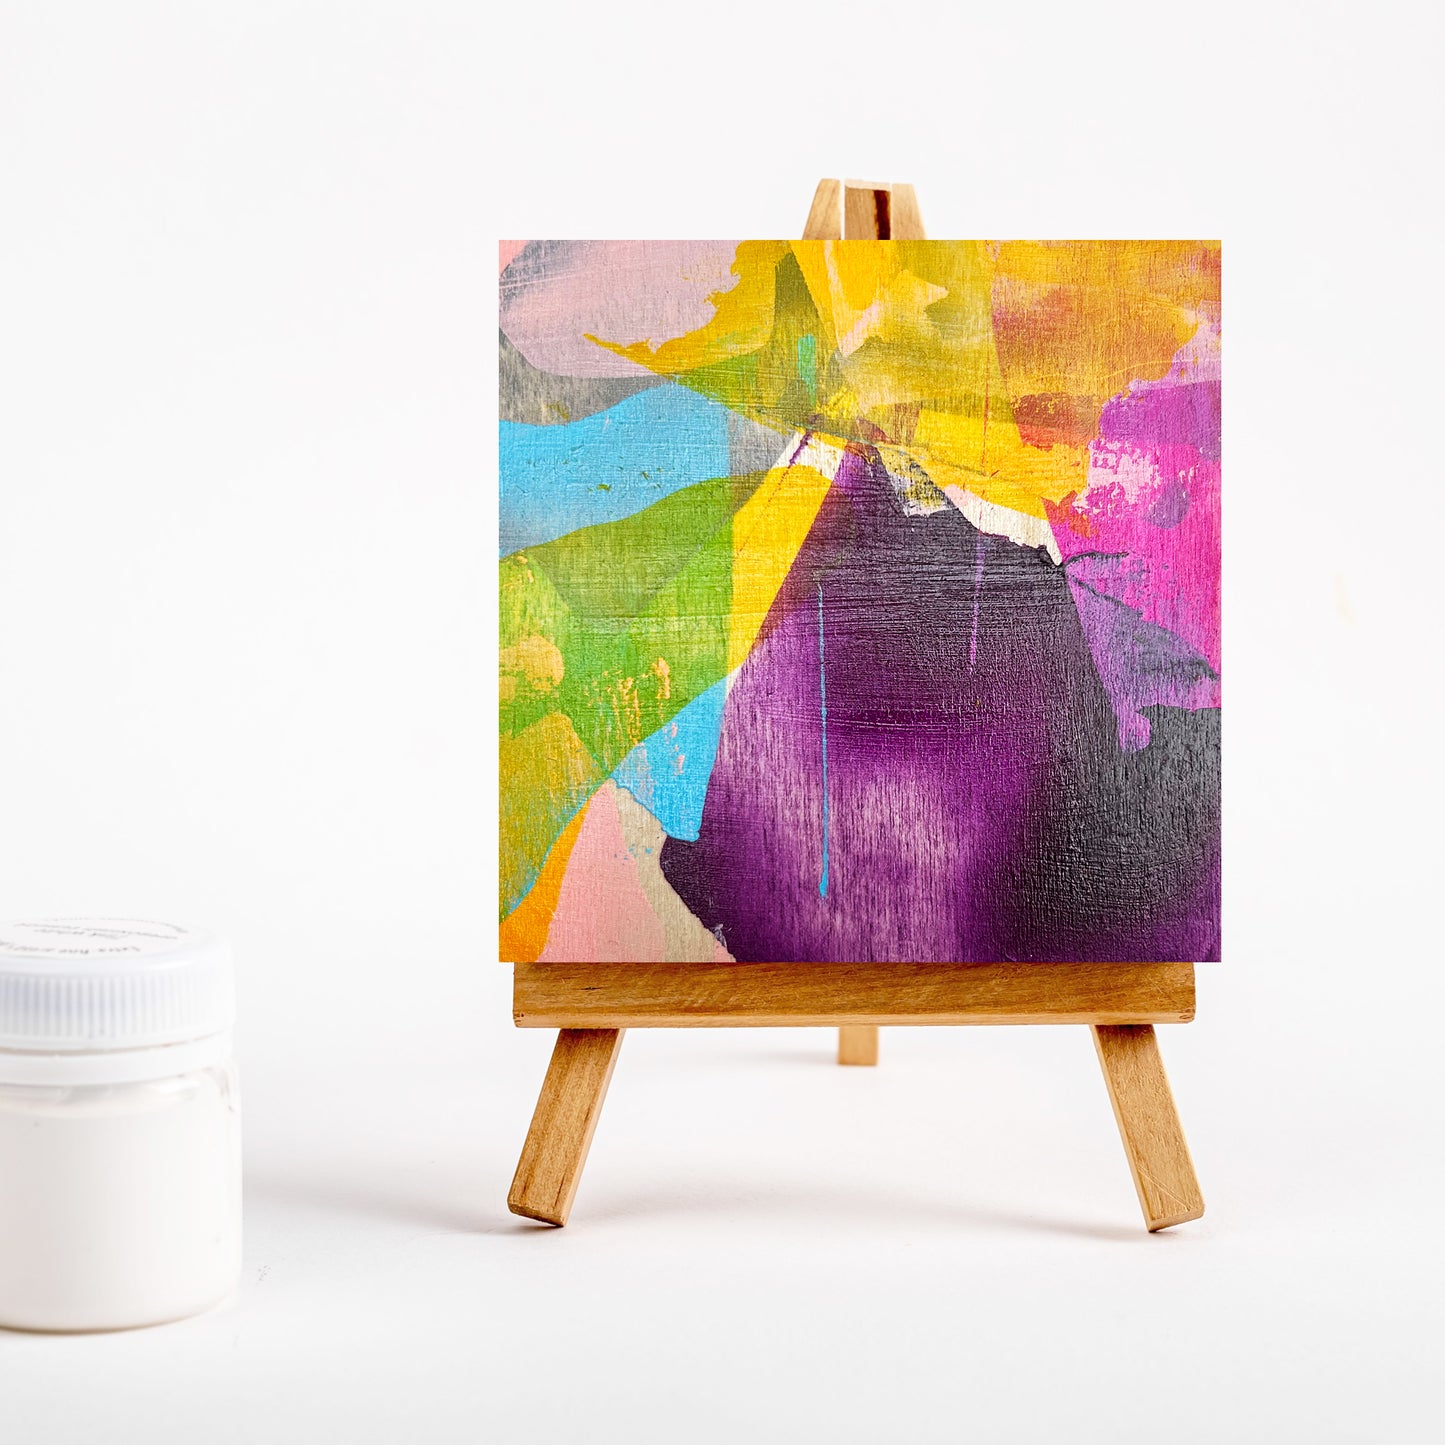 MINI "HOPE SERIES" PAINTING WITH EASEL - #301